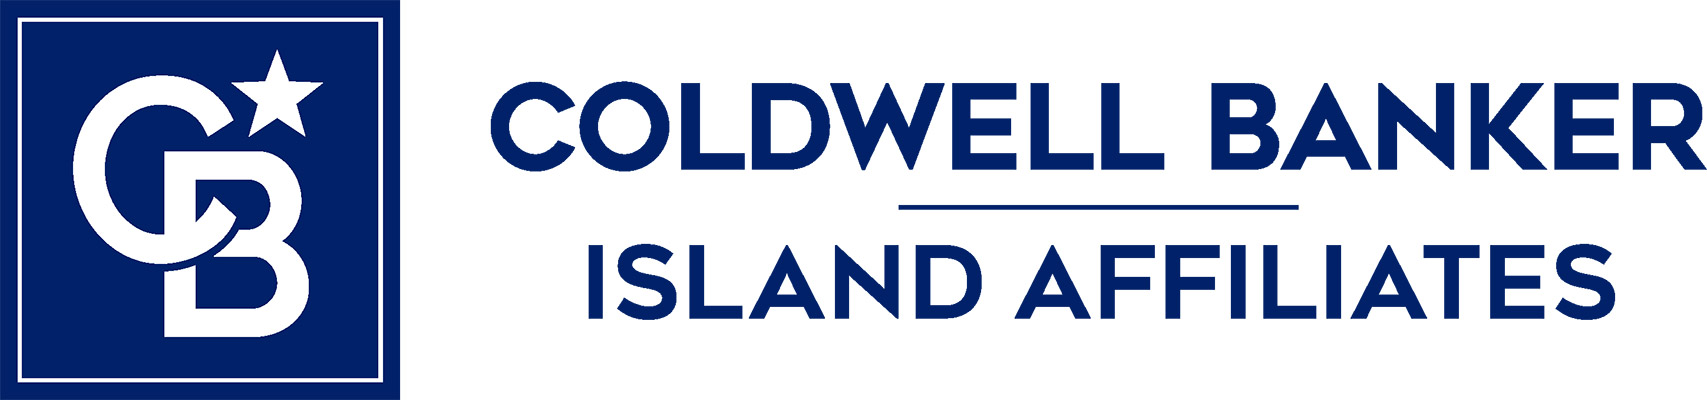 Caribbean Real Estate | Property For Sale in the Caribbean | Coldwell Banker Islands